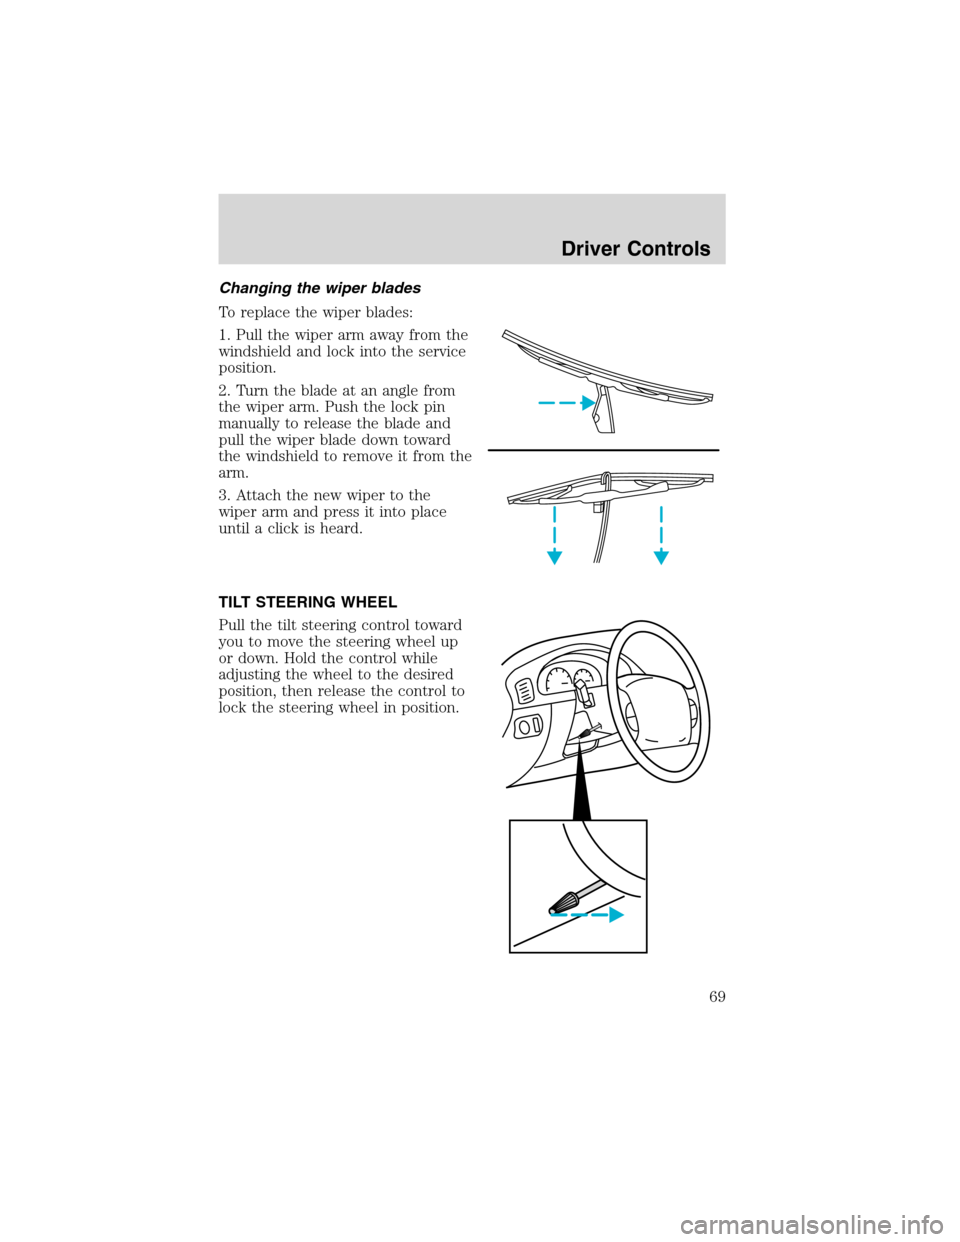 FORD F750 2003 10.G Owners Manual Changing the wiper blades
To replace the wiper blades:
1. Pull the wiper arm away from the
windshield and lock into the service
position.
2. Turn the blade at an angle from
the wiper arm. Push the loc